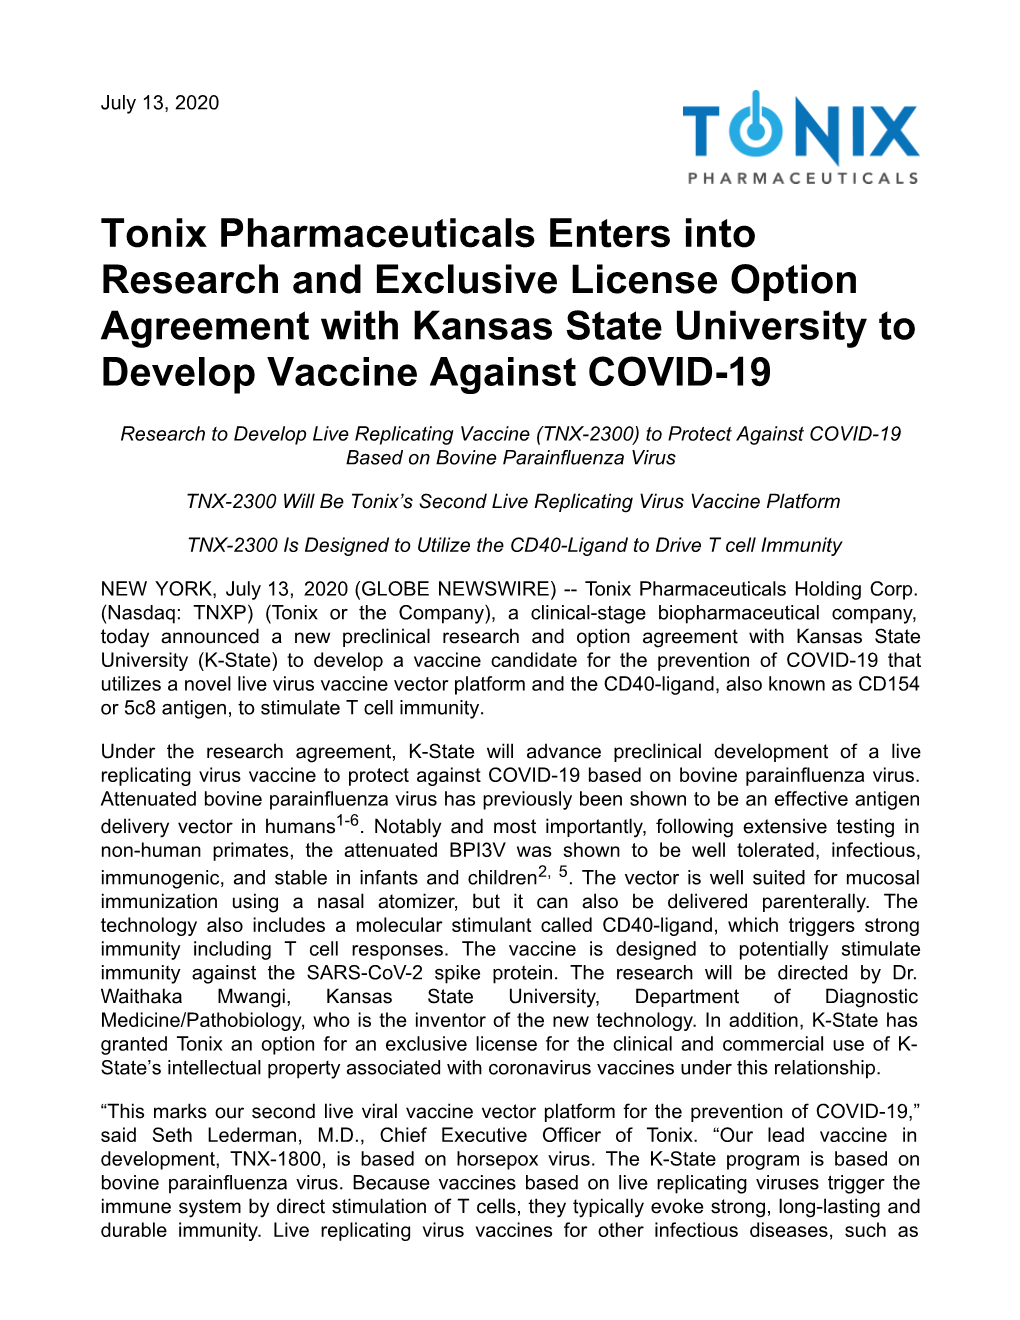 Tonix Pharmaceuticals Enters Into Research and Exclusive License Option Agreement with Kansas State University to Develop Vaccine Against COVID-19